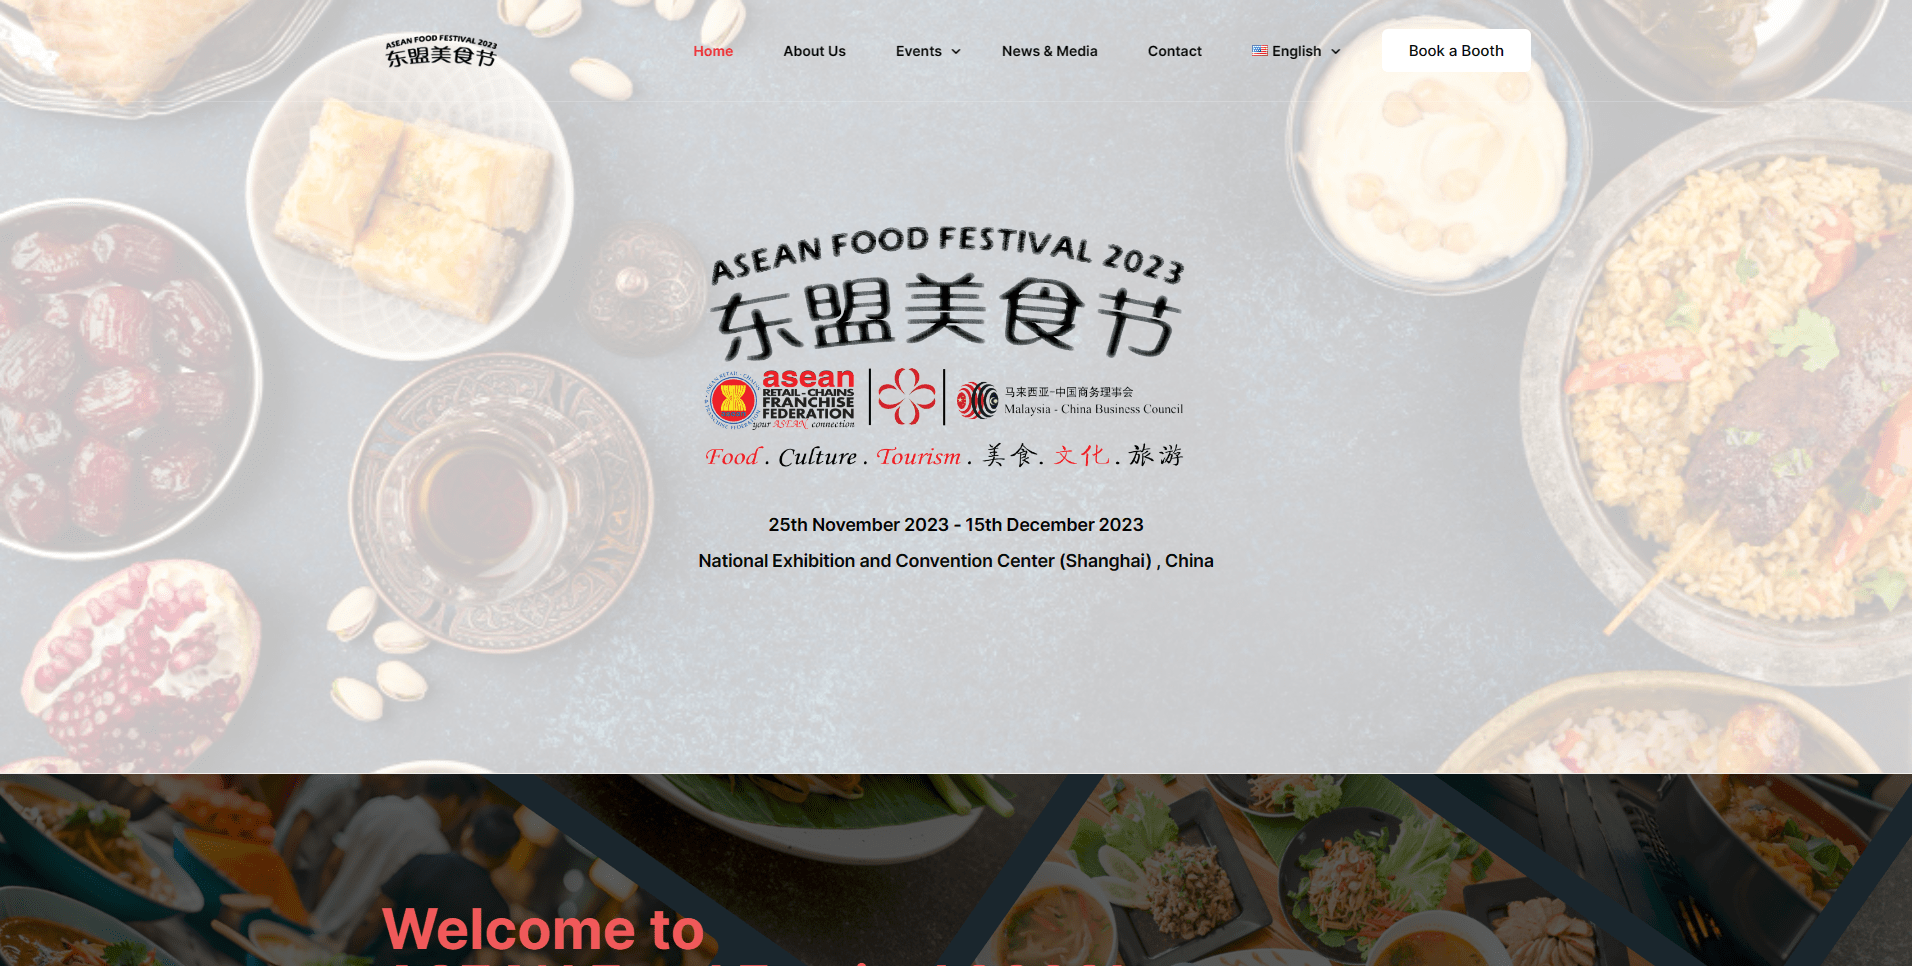 Screenshot 036 Home ASEAN Food Festival 2023 aseanfestival.com min | Infinitly Digital Solutions and Consultancy